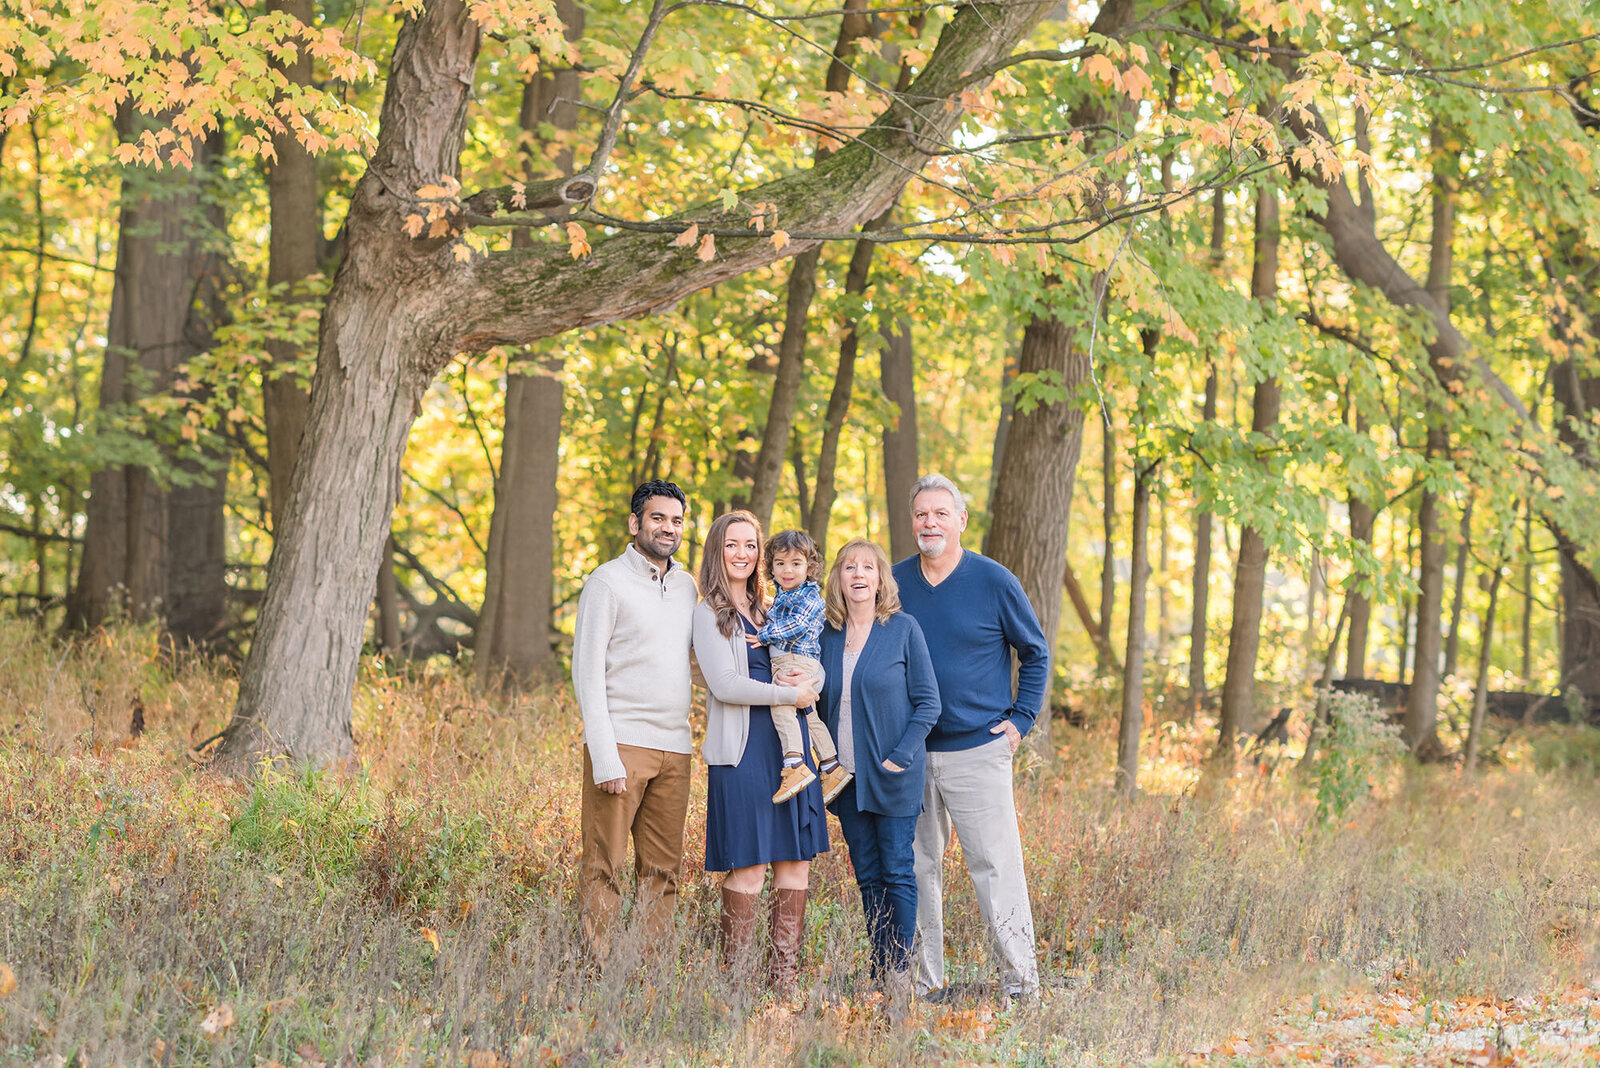 Small extended family photoshoot in the fall woods